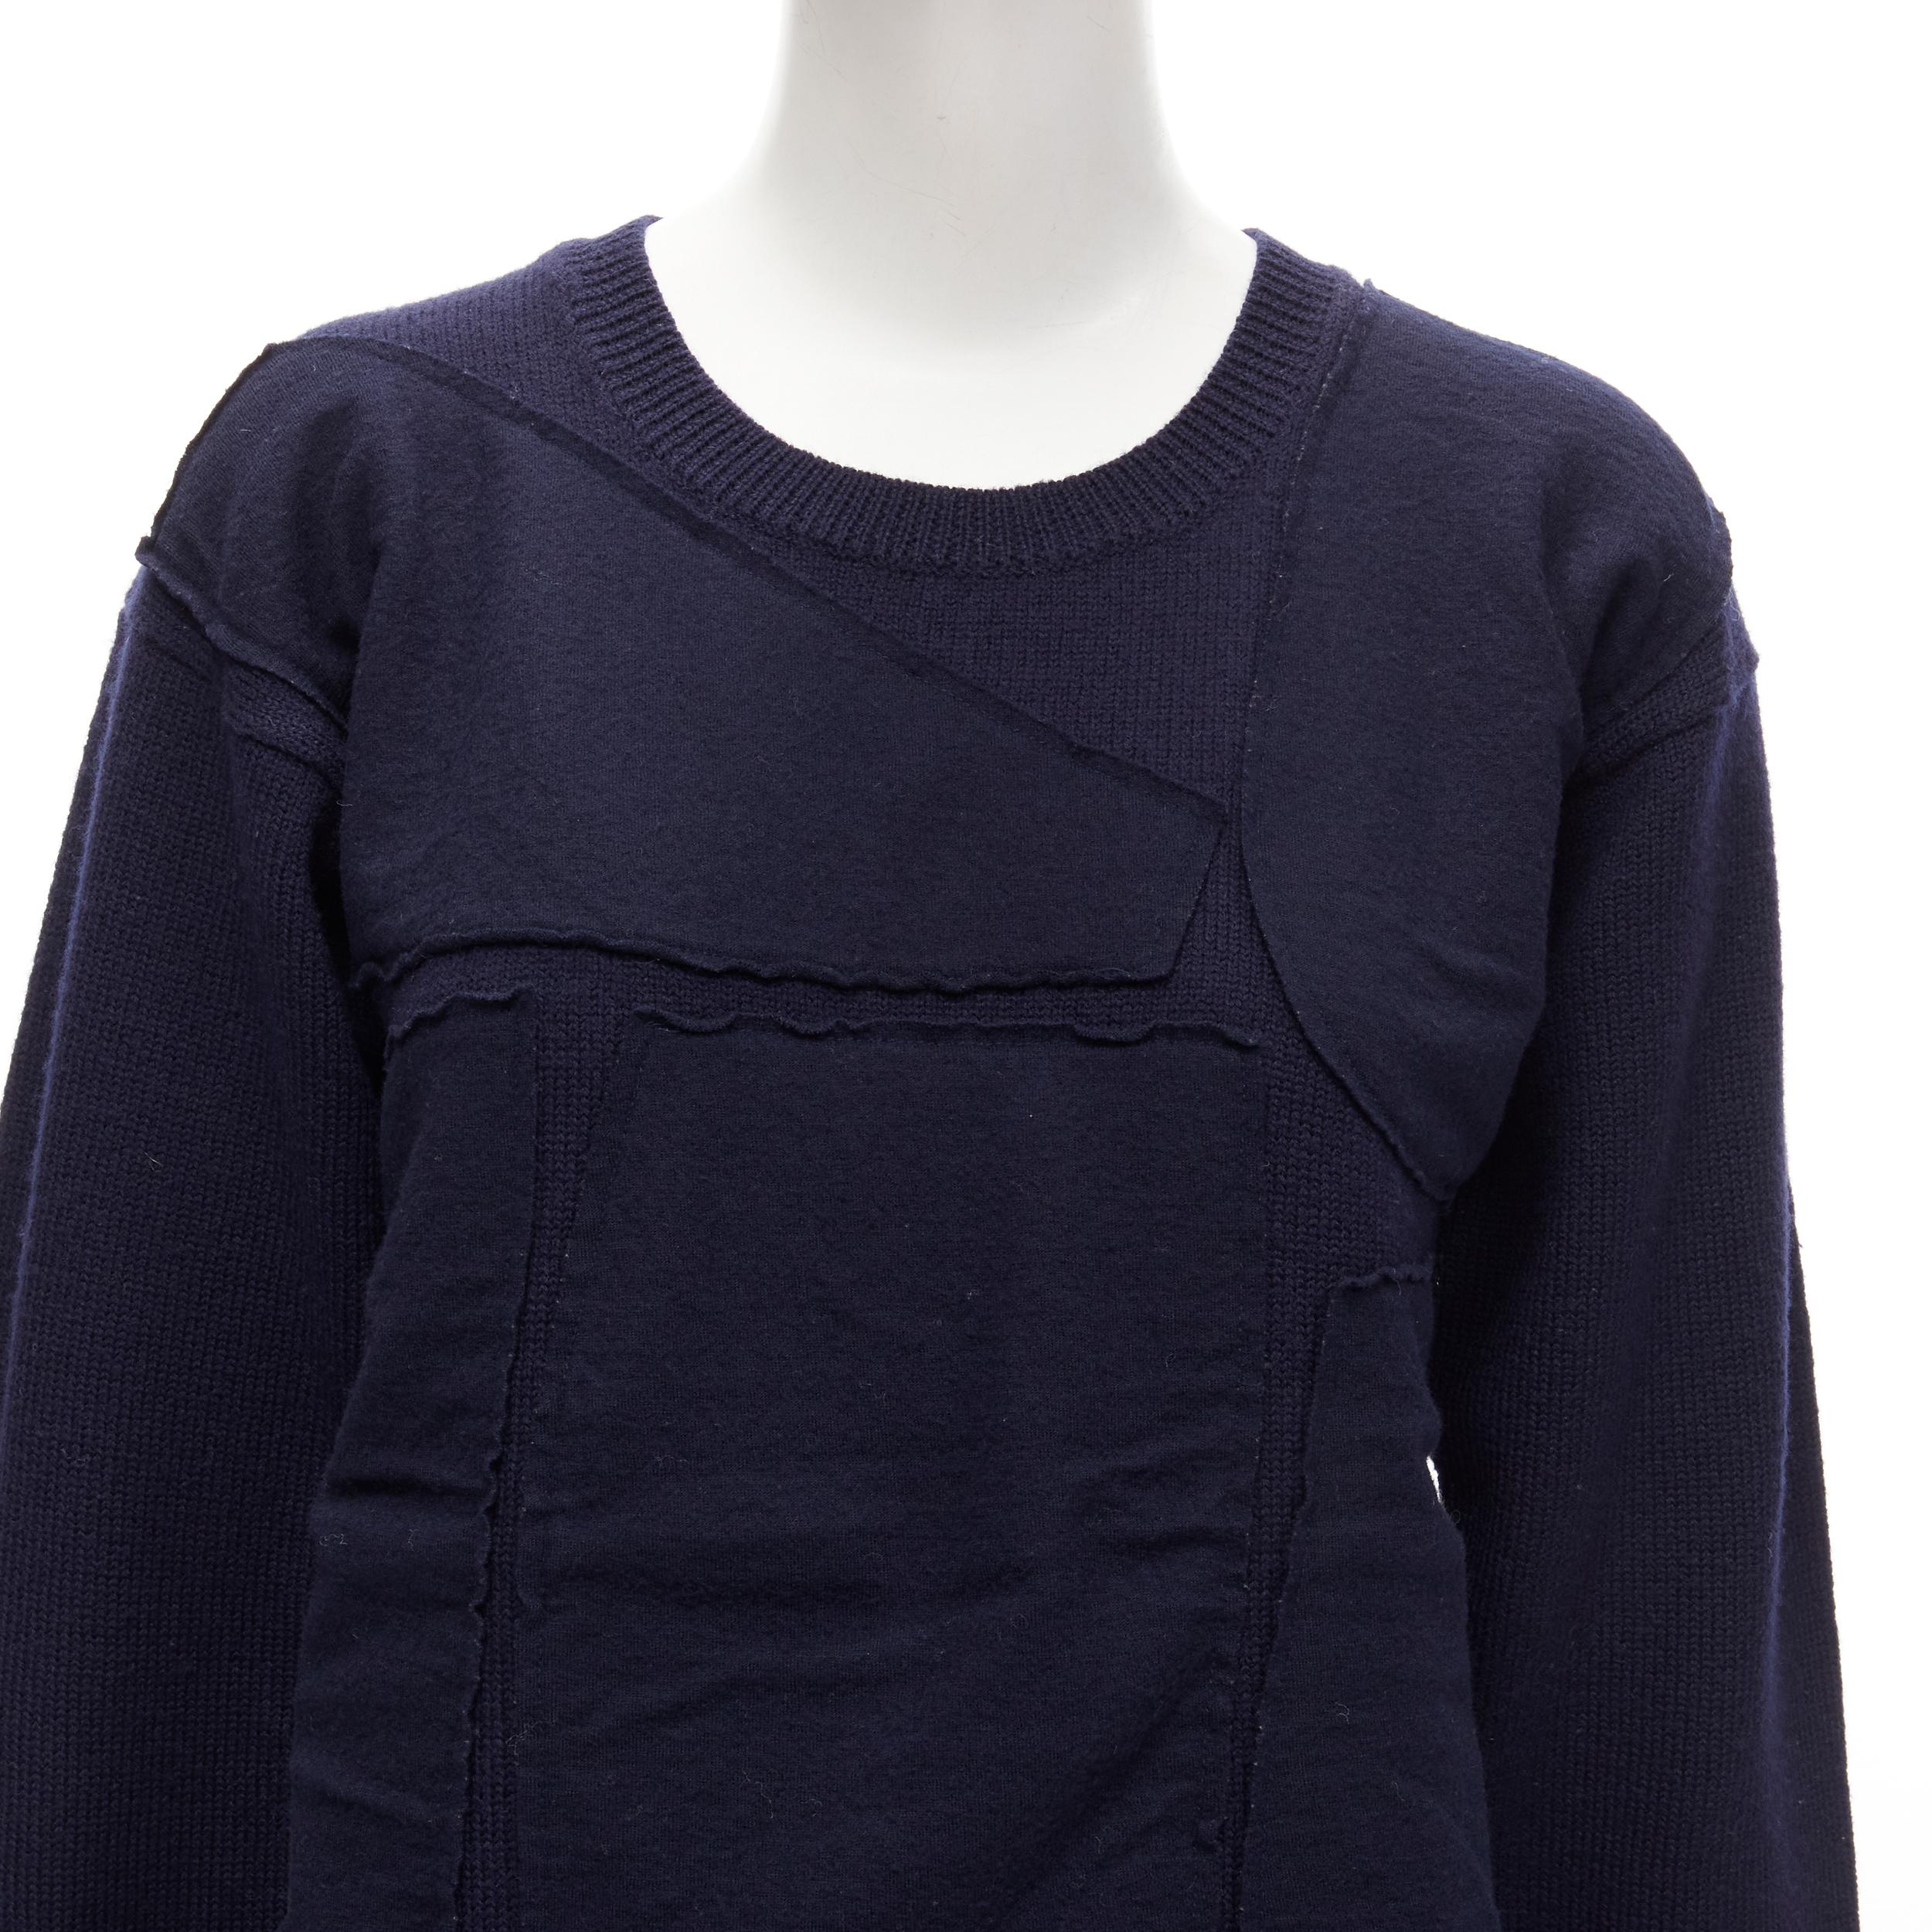 COMME DES GARCONS 1980er Jahre Vintage Pullover aus marineblauer Wolle mit Patchworkmuster
Referenz: TGAS/C01694
Marke: Comme Des Garcons
Designer: Rei Kawakubo
Collection'S: 1980's
MATERIAL: Wolle
Farbe: Blau
Muster: Solide
Verschluss: